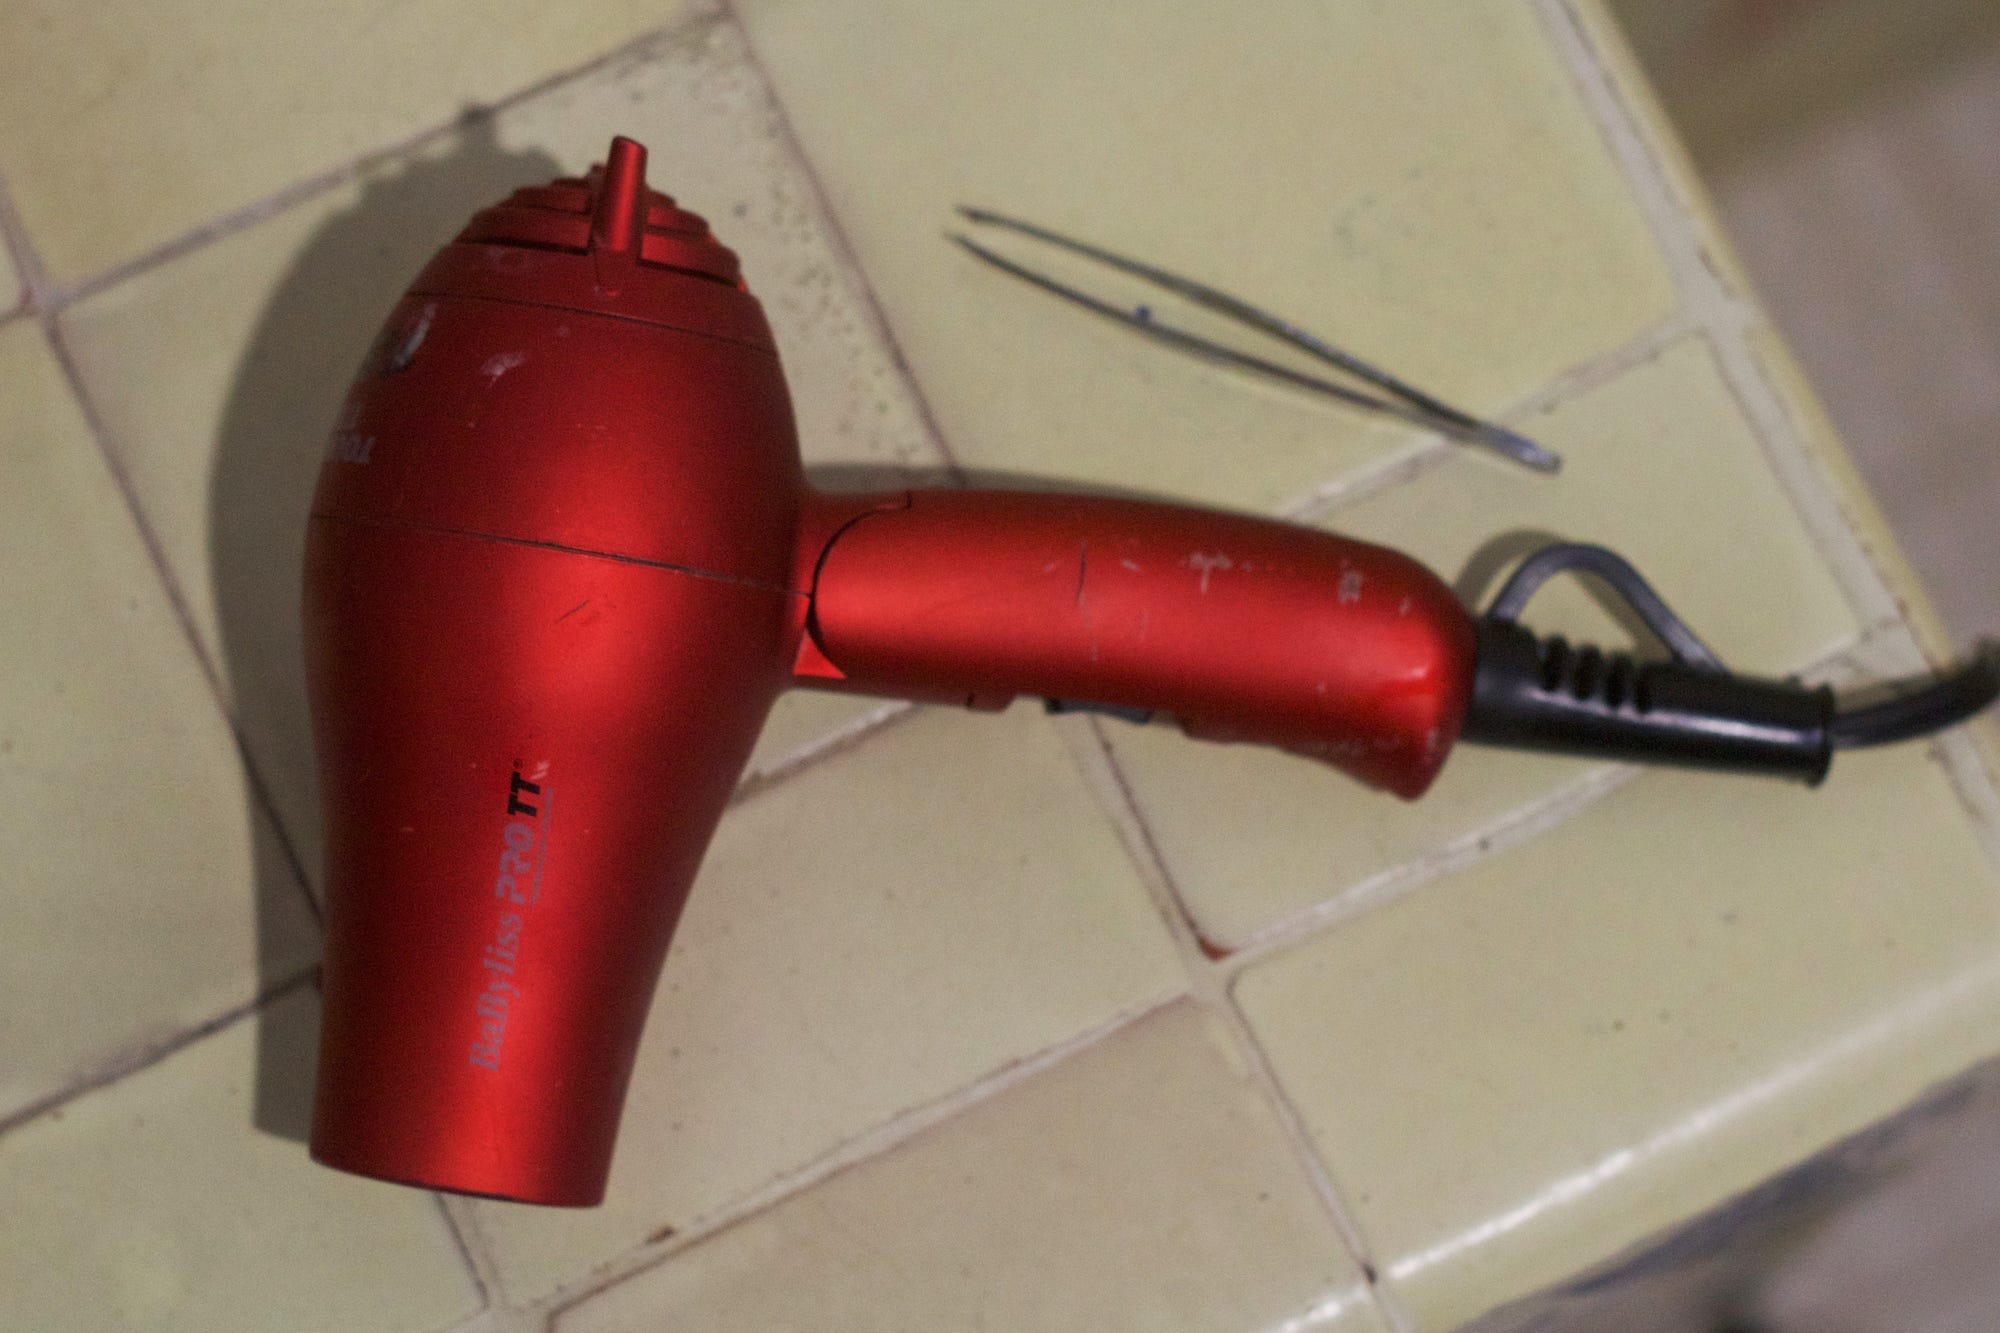 soup-can-sized blow dryer